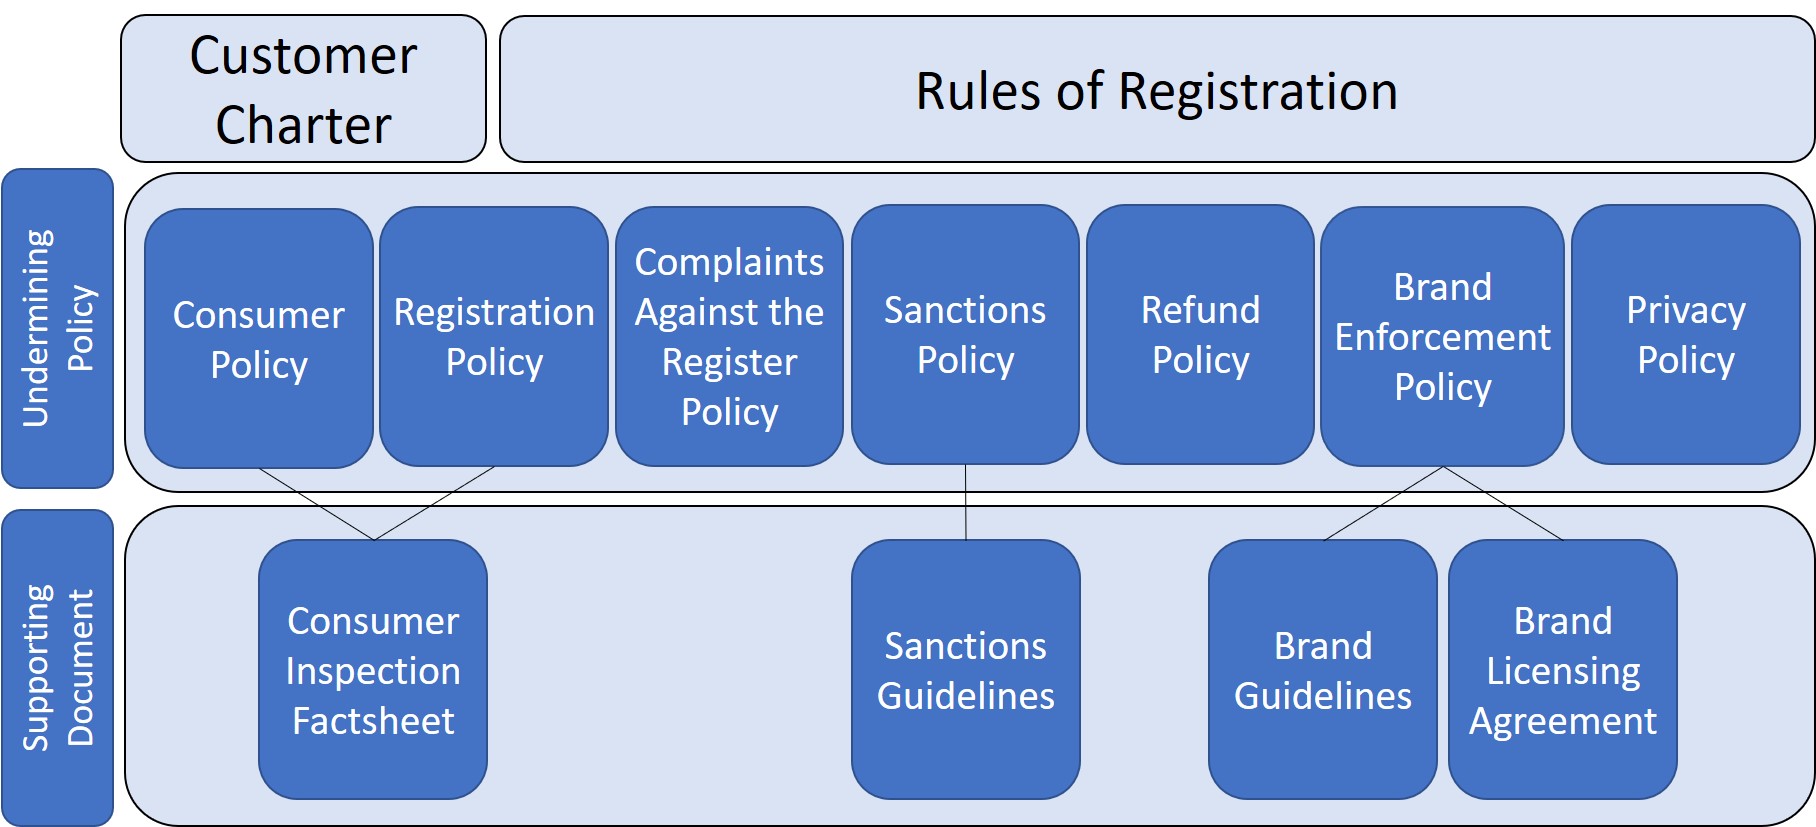 Policy chart showing how our policy documents fit into our business. Our Undermining policies are Consumer, Registration, complaints against the register, sanctions, refunds, brand enforcement and privacty policy. Our Supporting documentation is consumer inspection faction (for consumer and registration policies), sanctions guidelines for sanction policy, brand guidlines and brand licensing agreements support our brand enforcement policy.